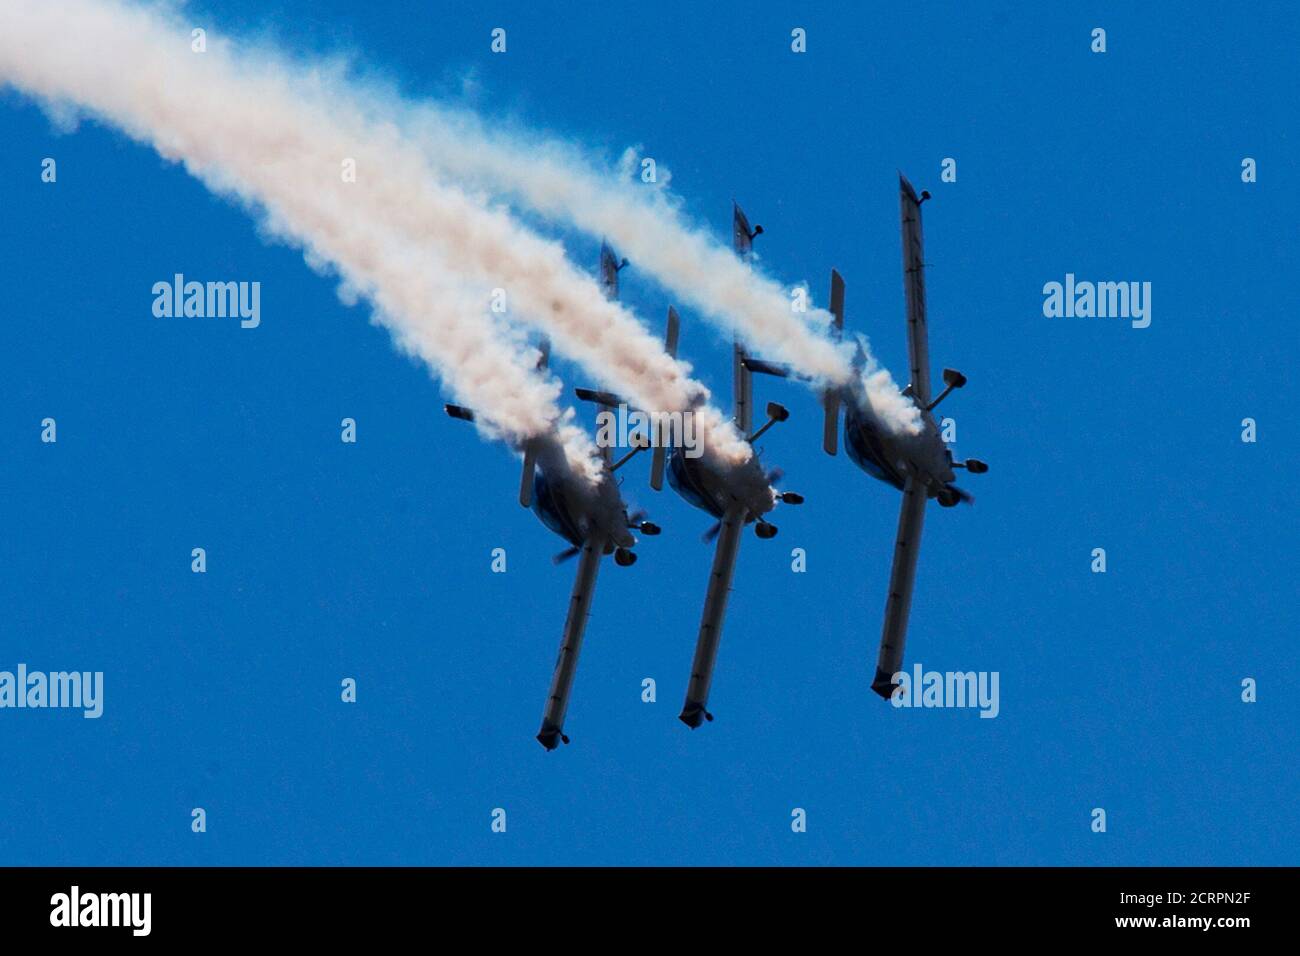 Fly Synthesis Texan High Resolution Stock Photography and Images - Alamy